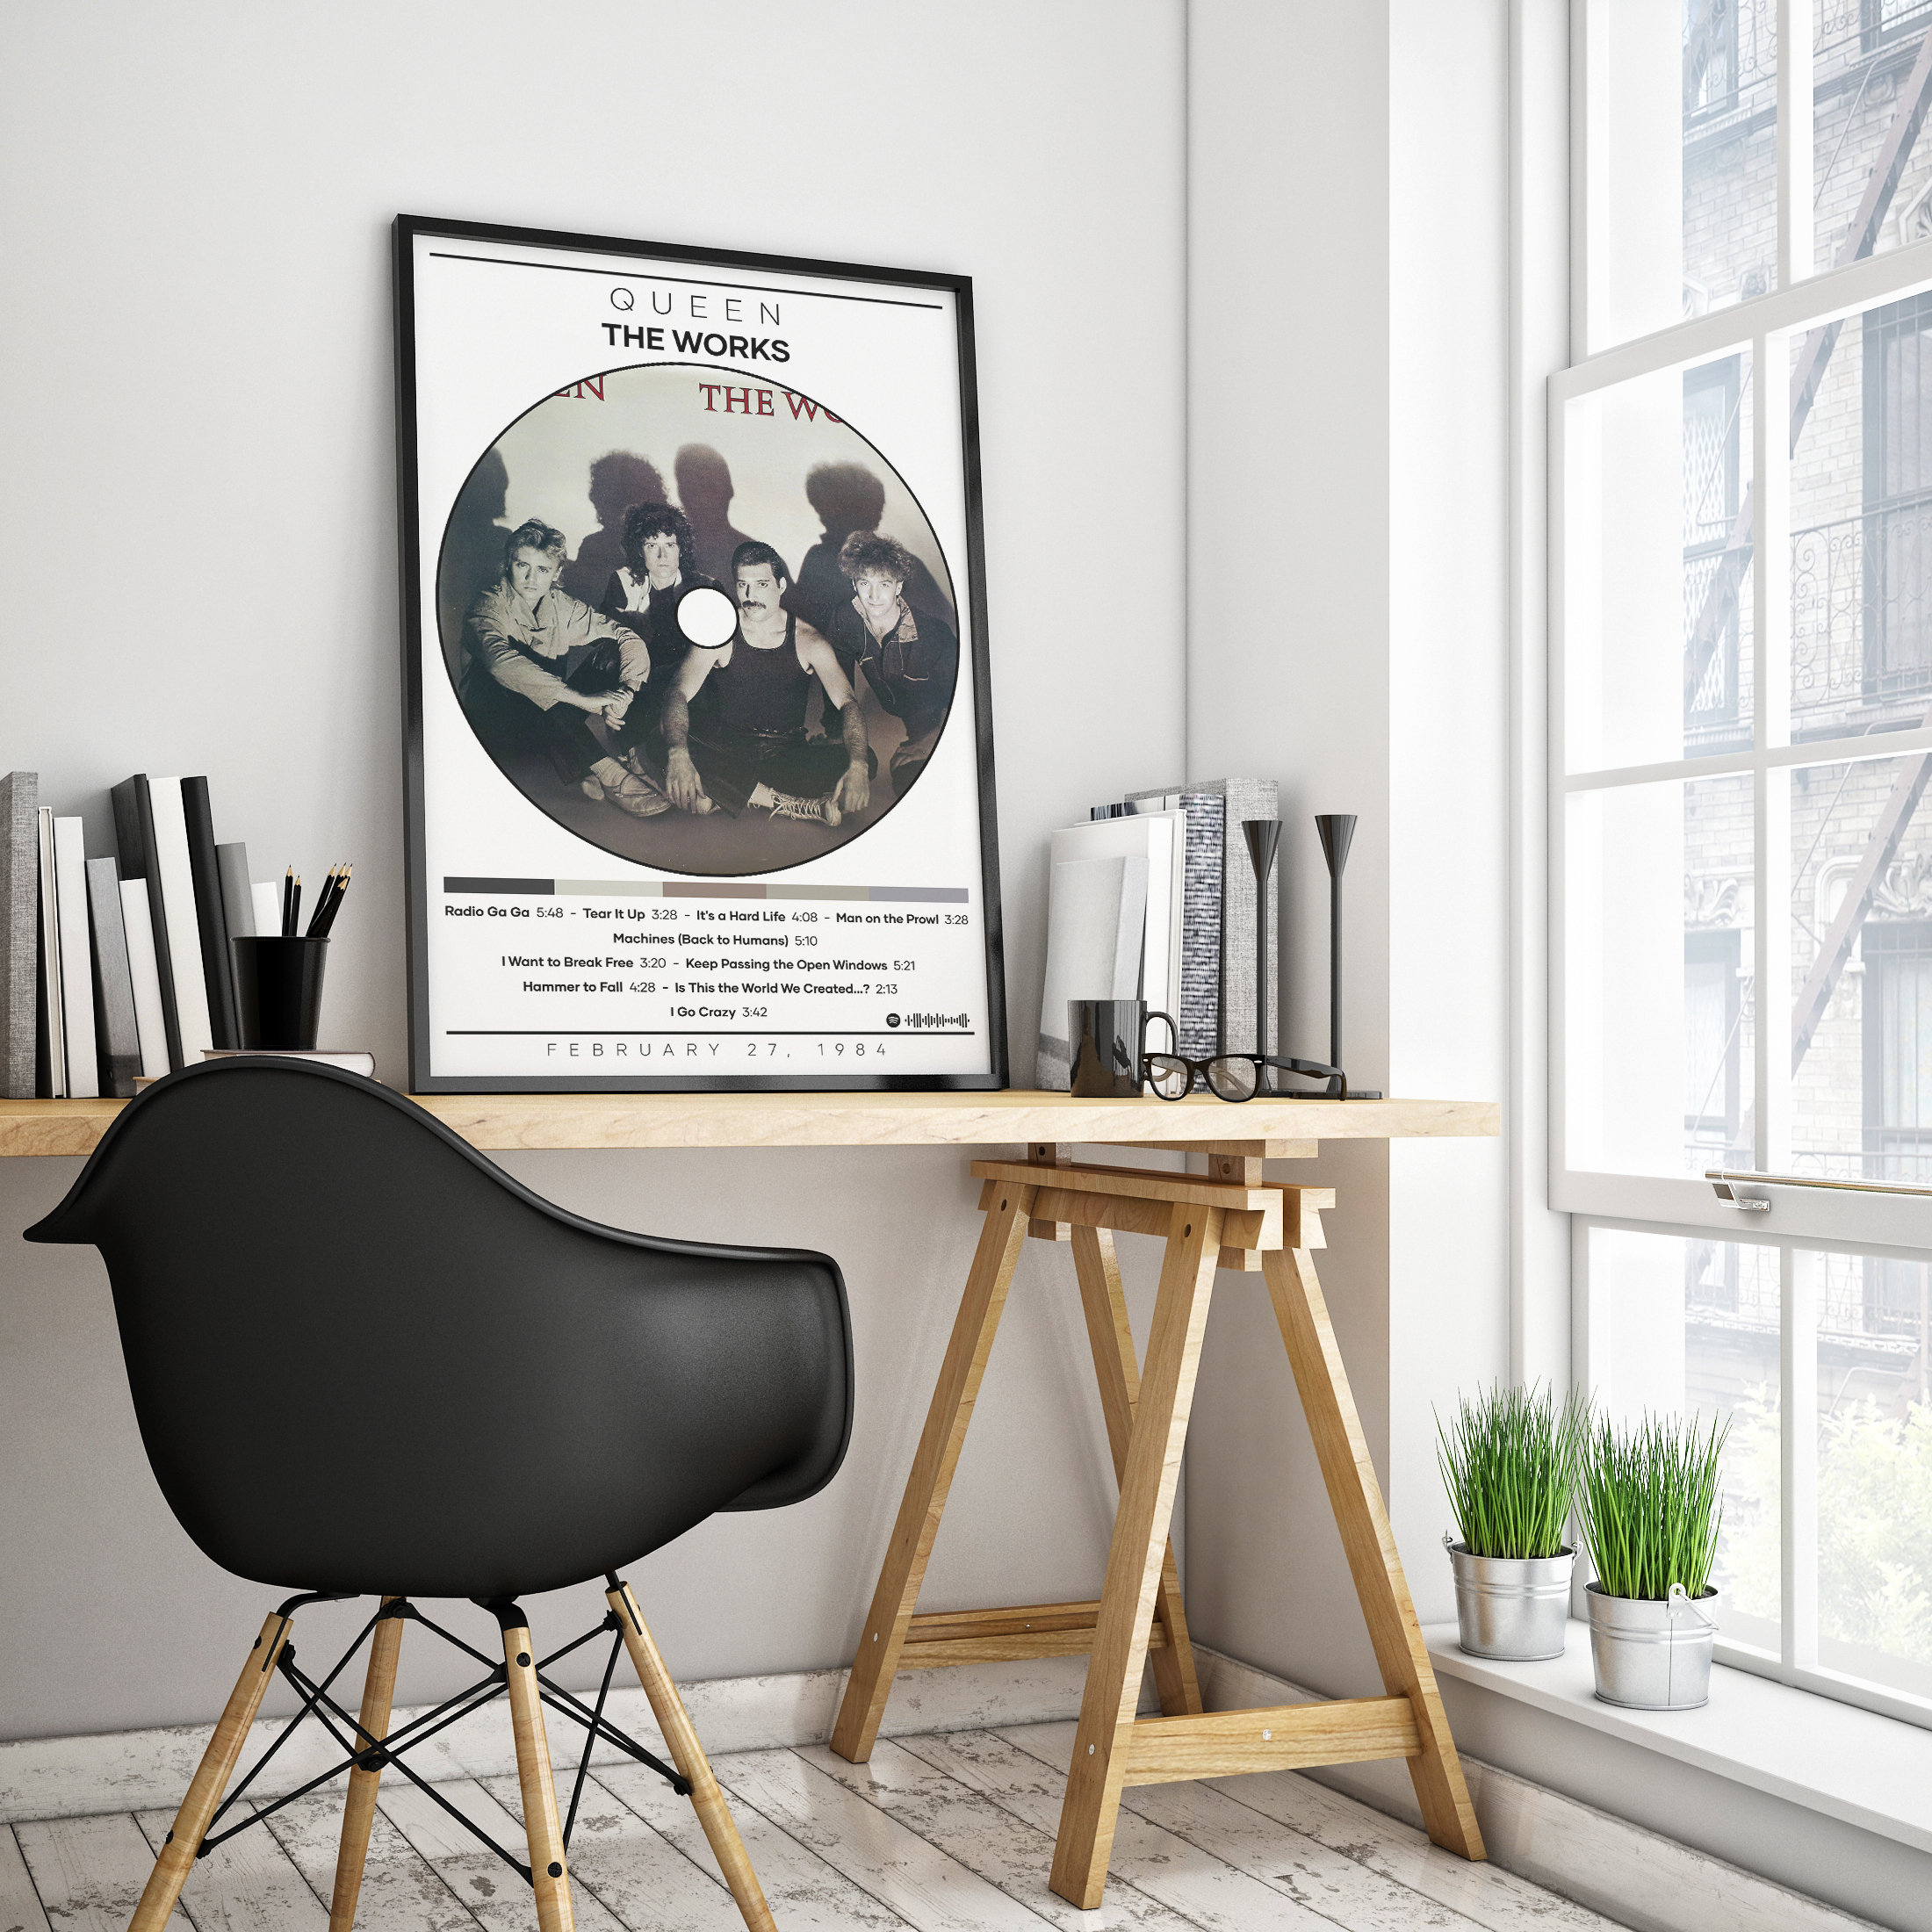 Queen Poster Print | The Works Poster | Rock Music Poster